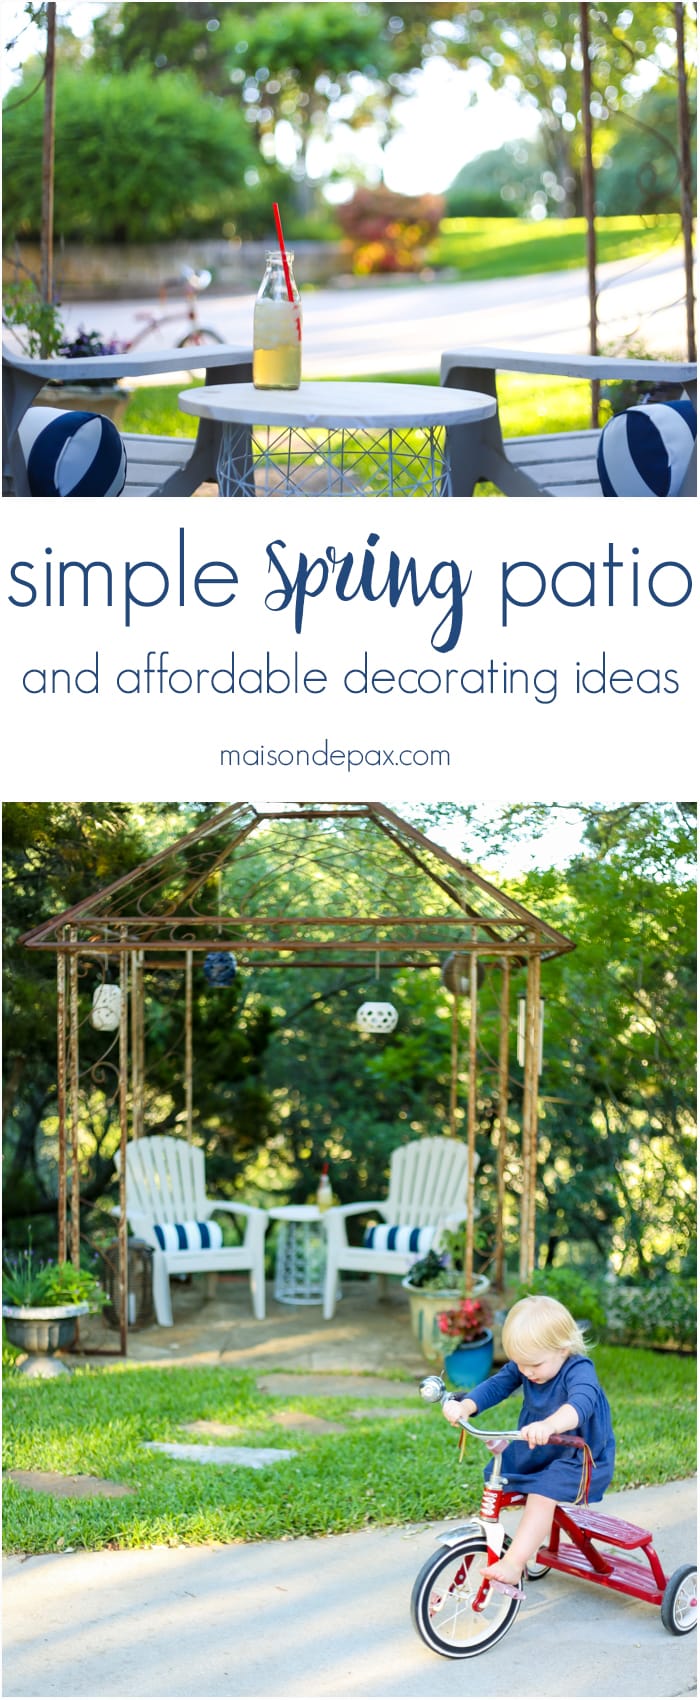 Patio decorated simply for spring - cute ideas and tips on where to find affordable outdoor decor | maisondepax.com